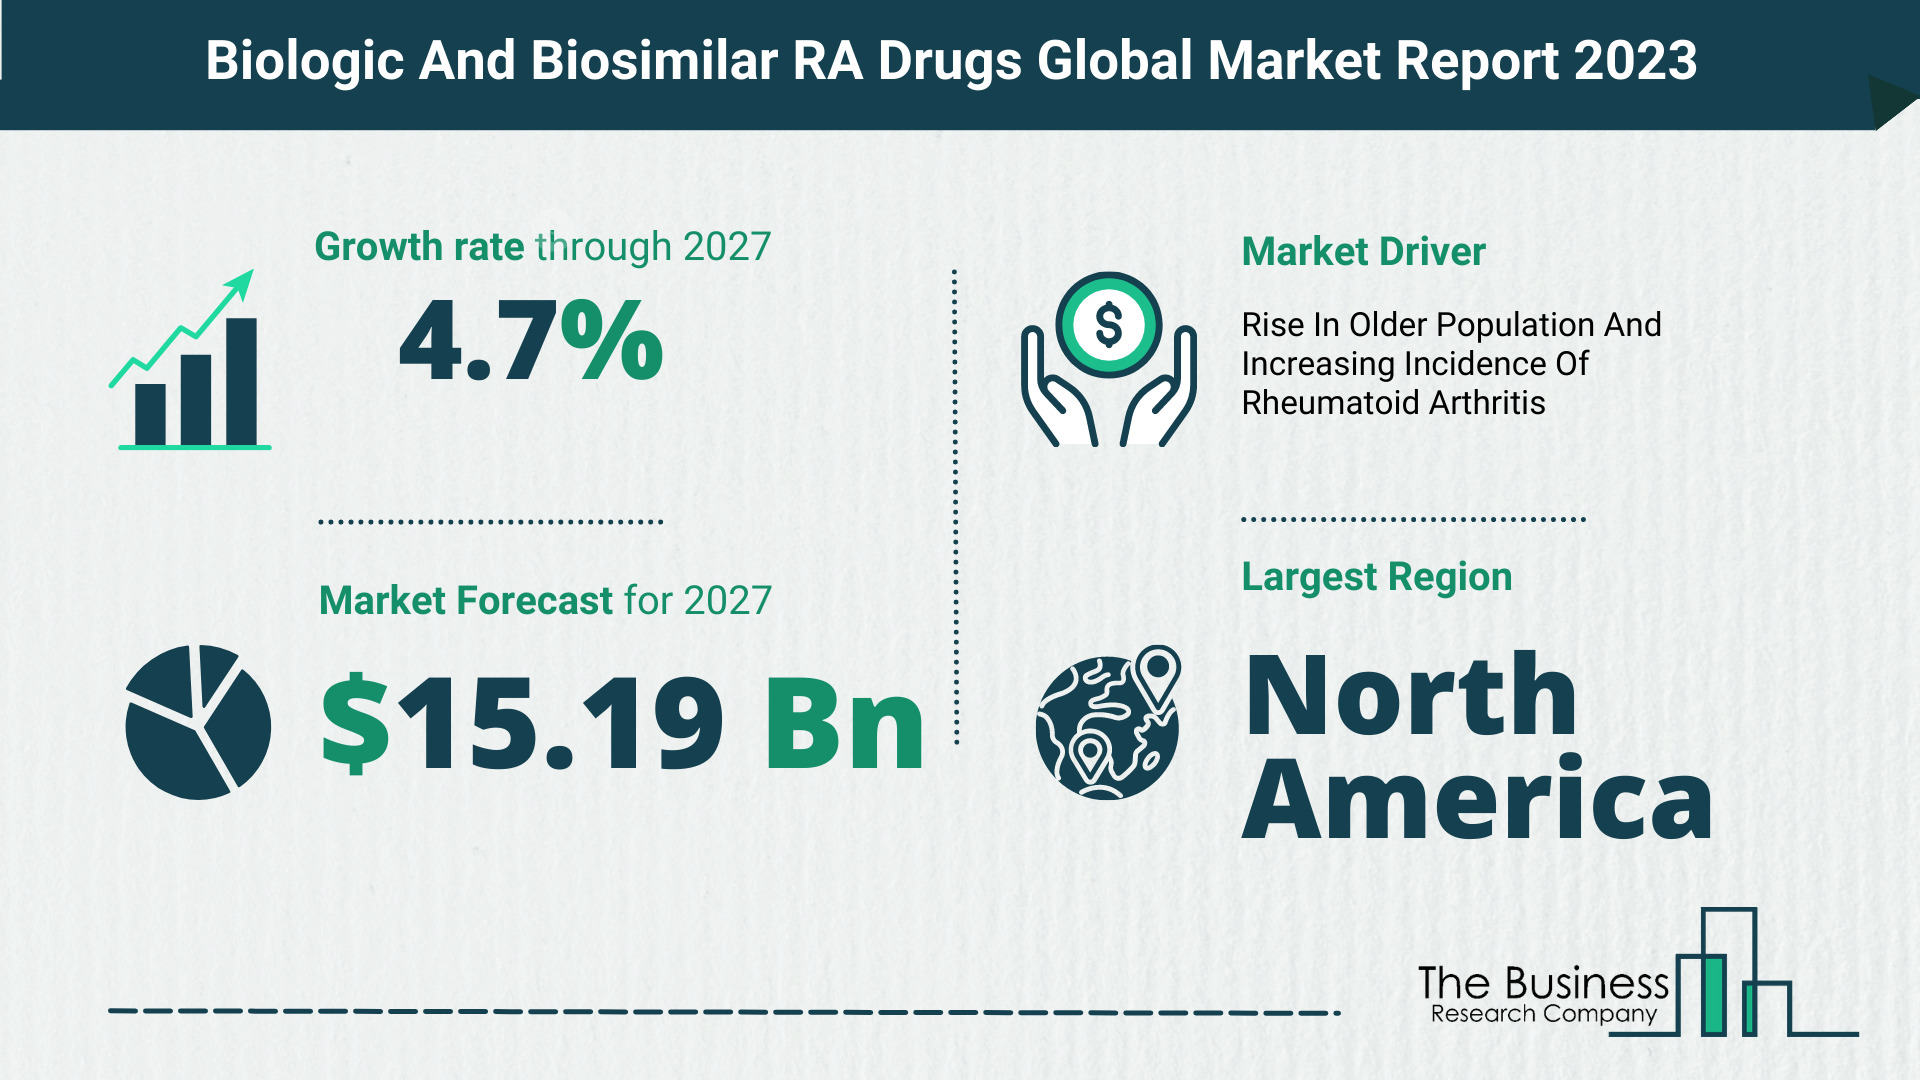 What Will The Biologic And Biosimilar RA Drugs Market Look Like In 2023?